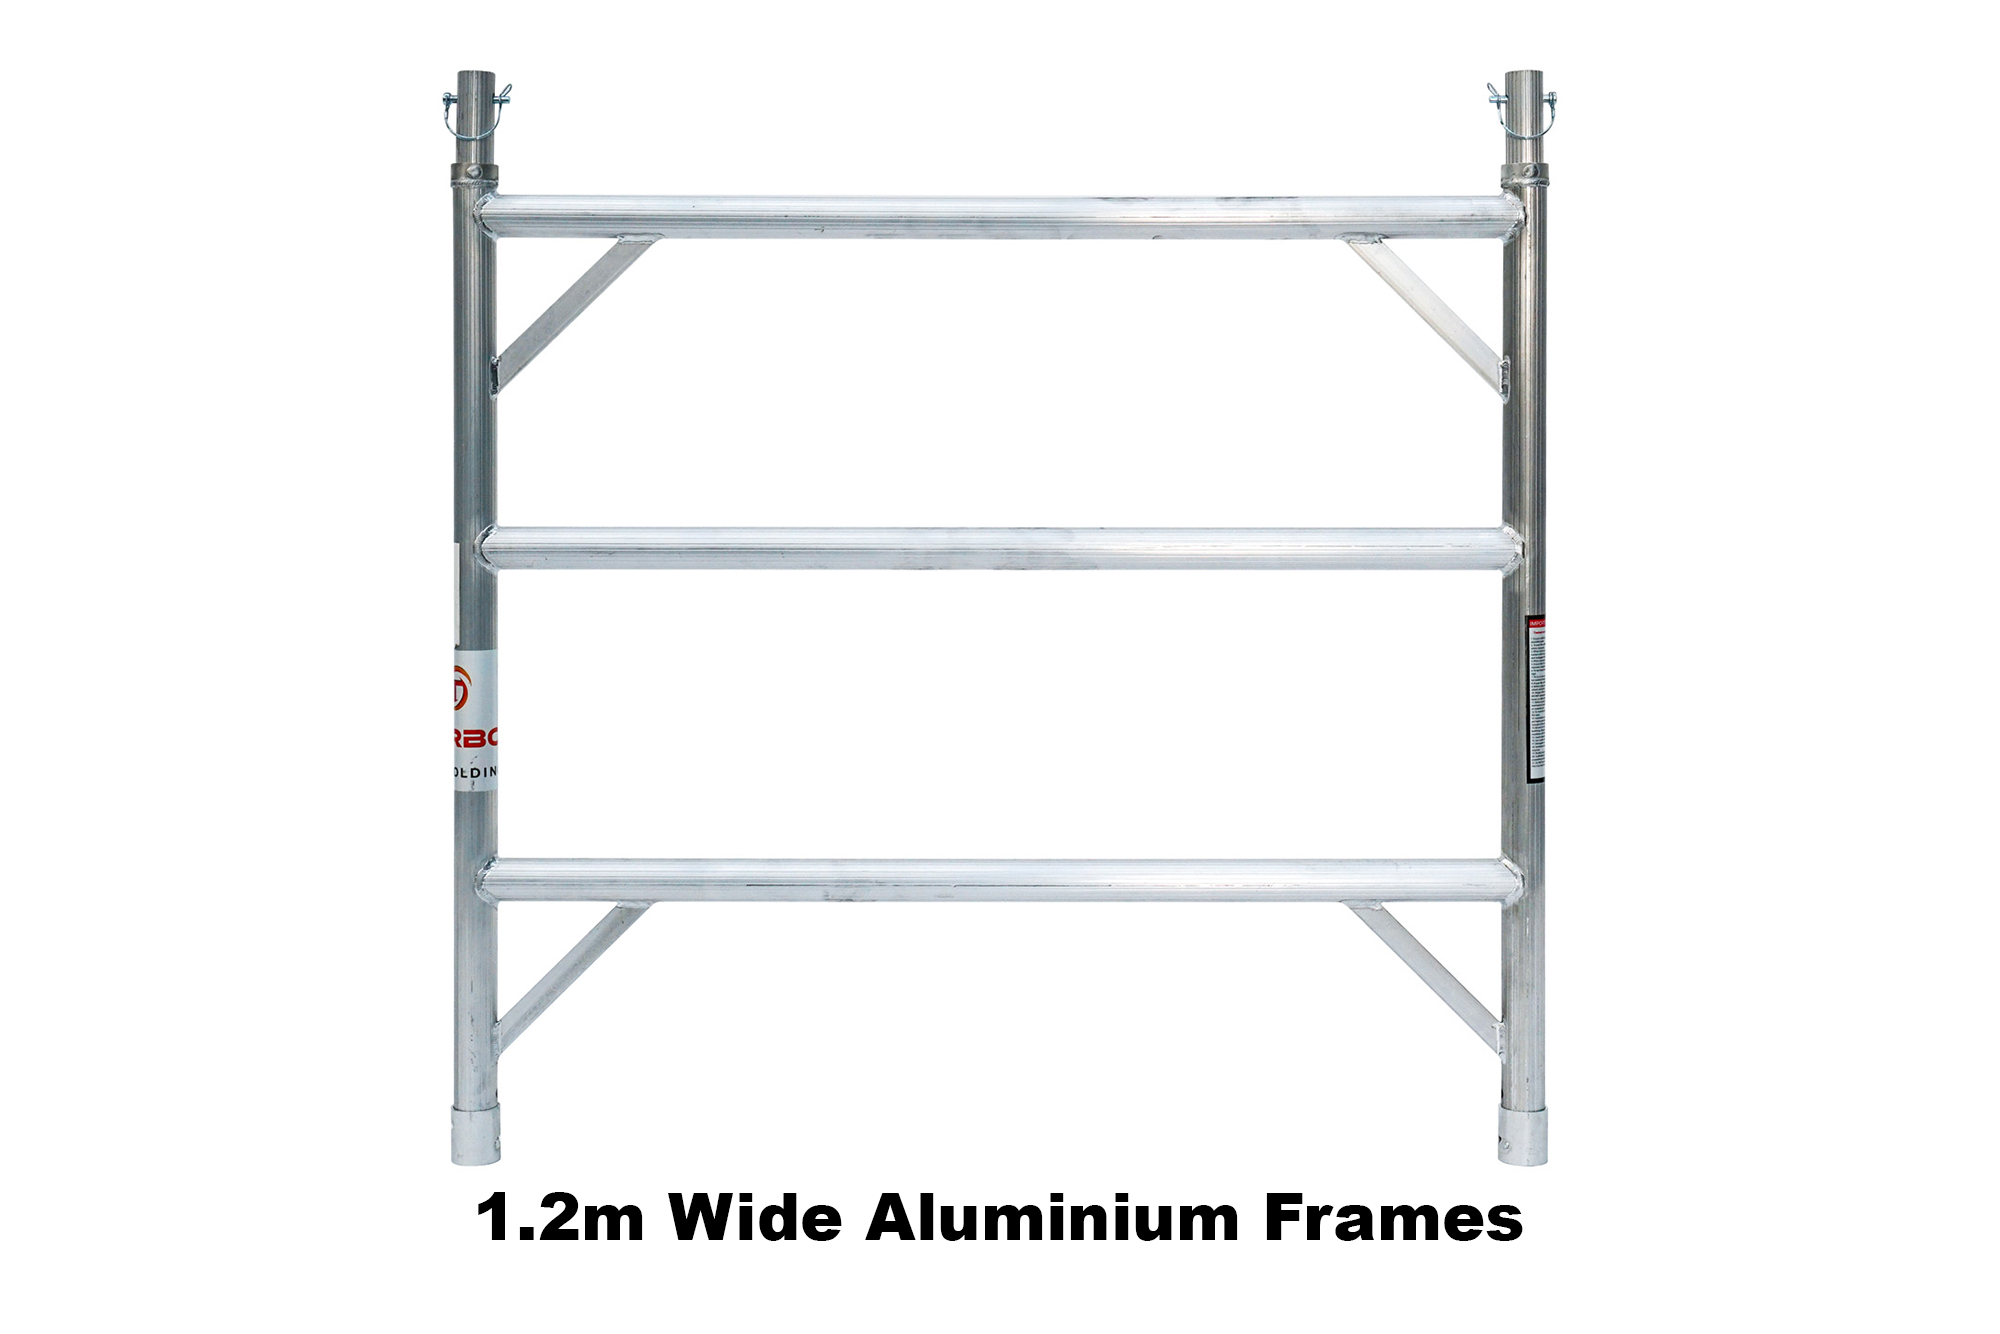 5.9m – 6.2m Wide Aluminium Mobile Scaffold Tower (Standing Height)